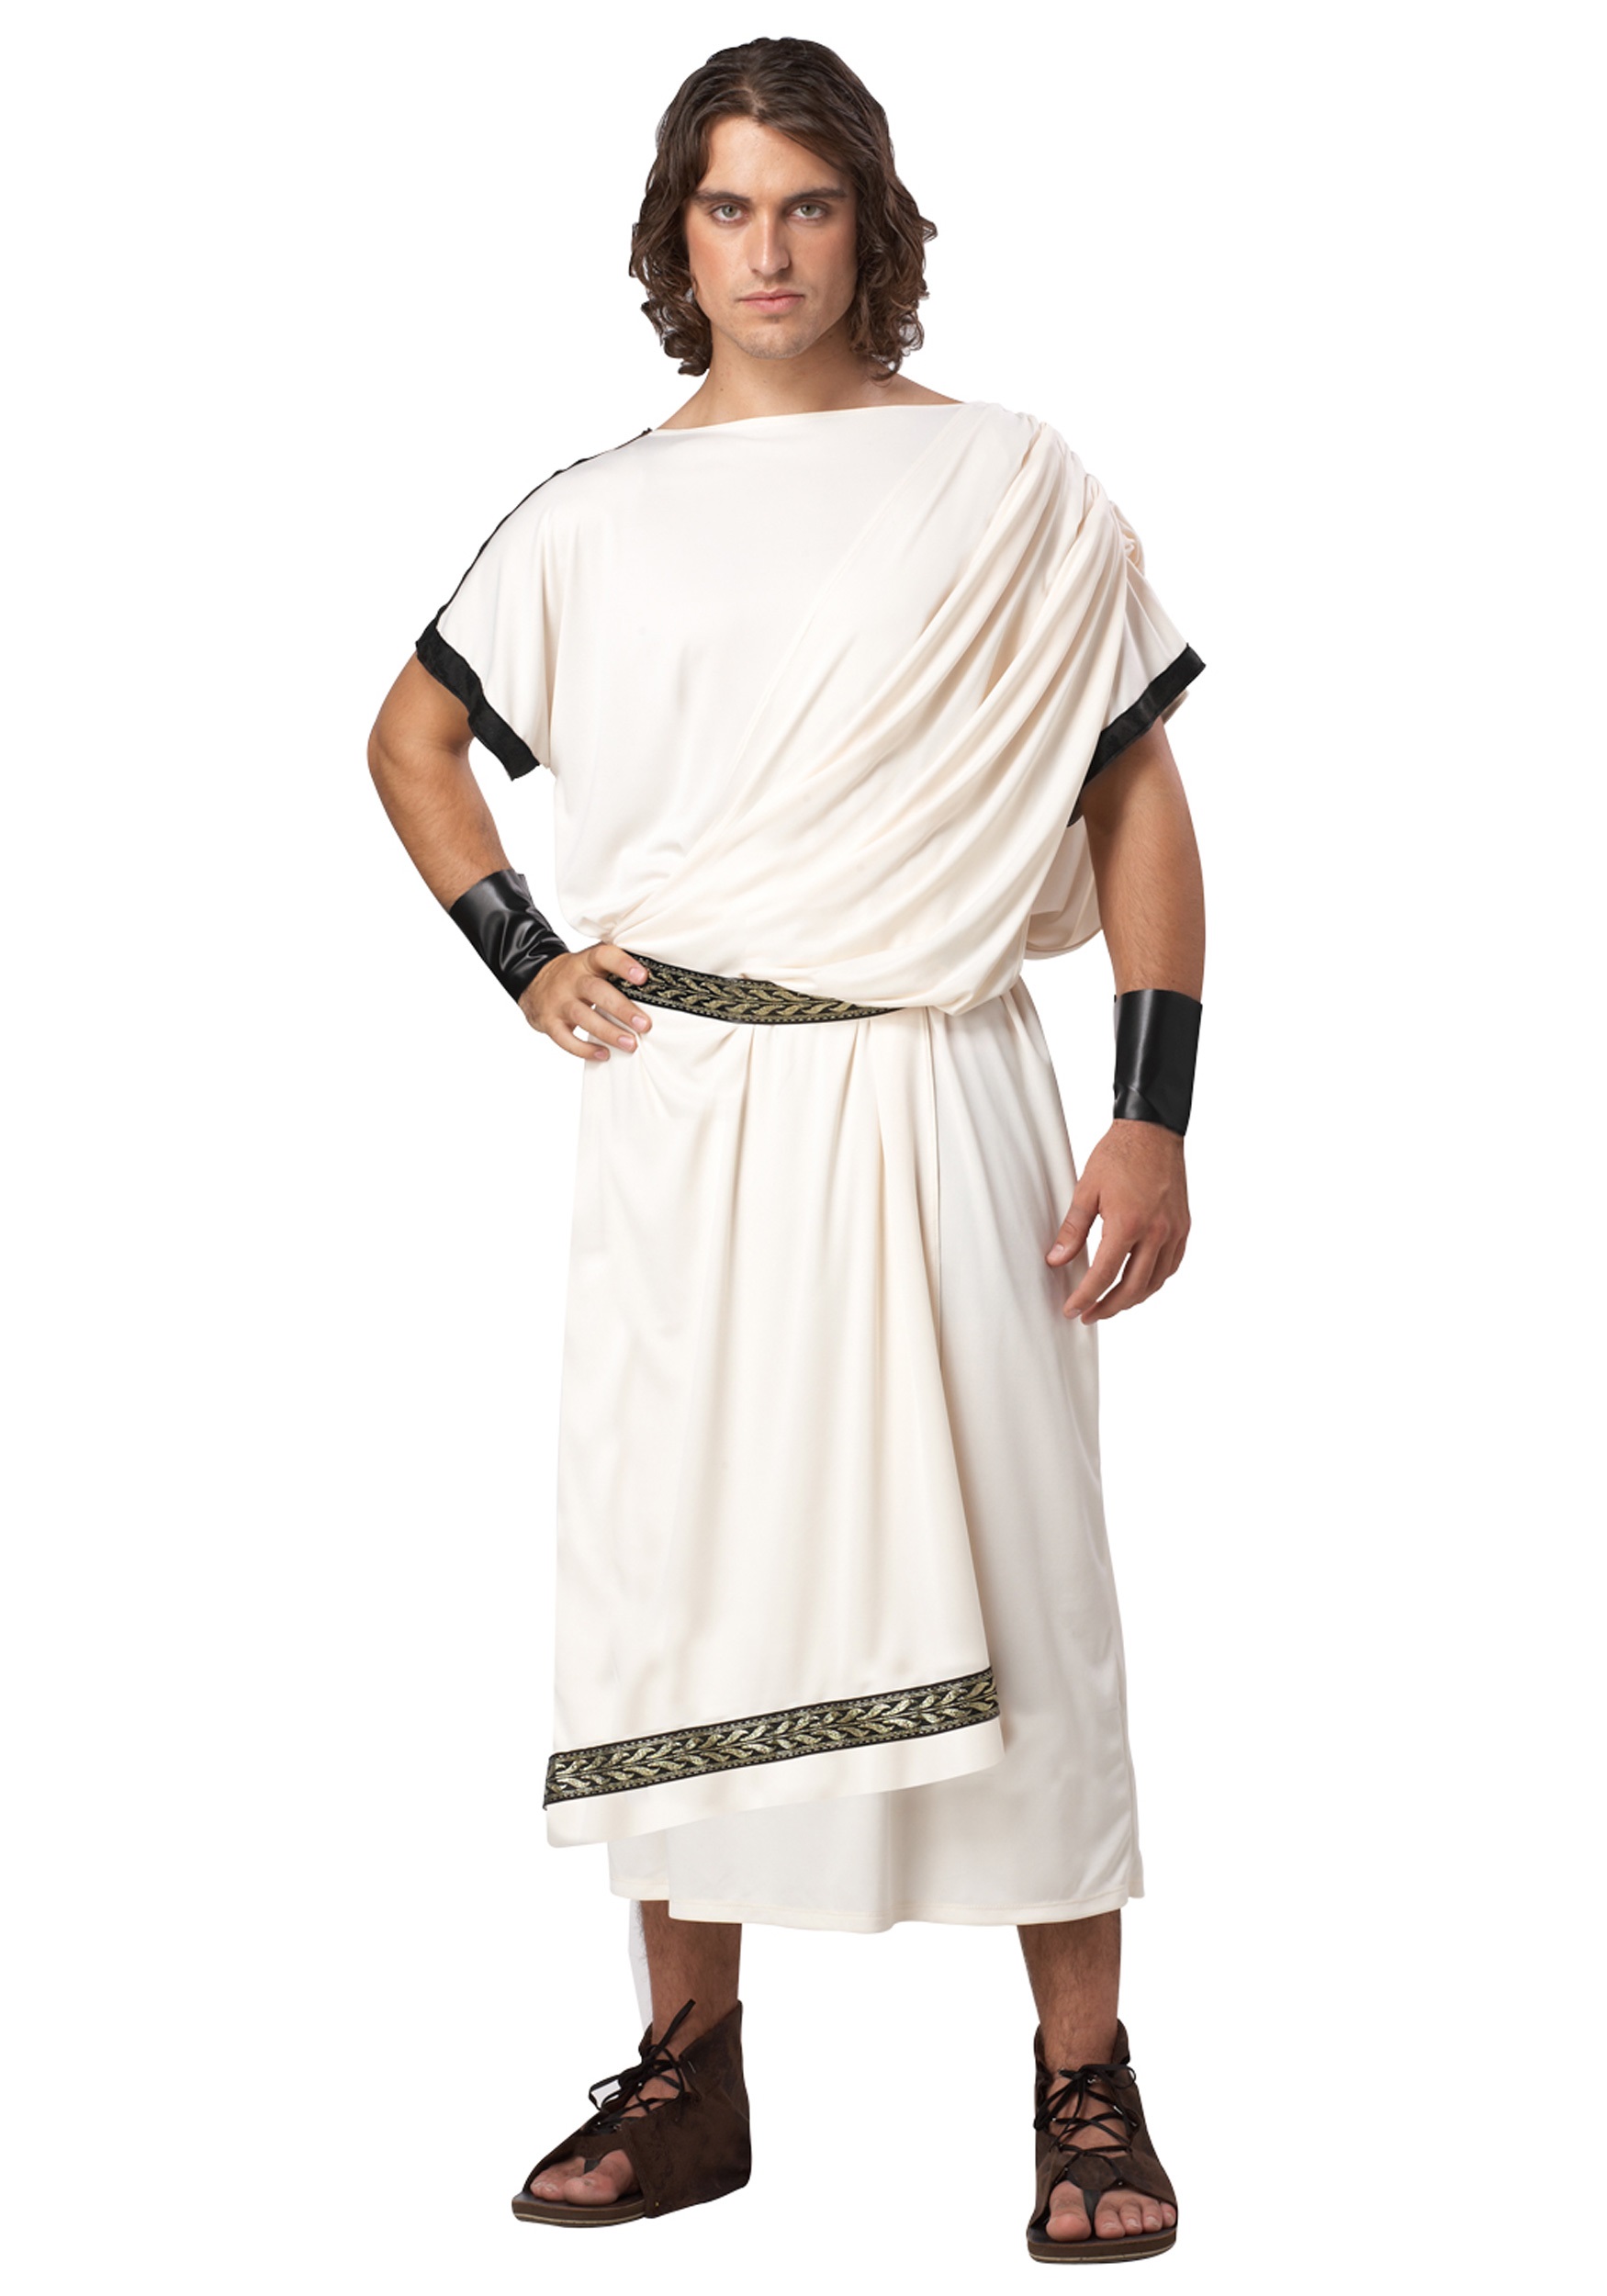 Adult Deluxe  Toga Costume